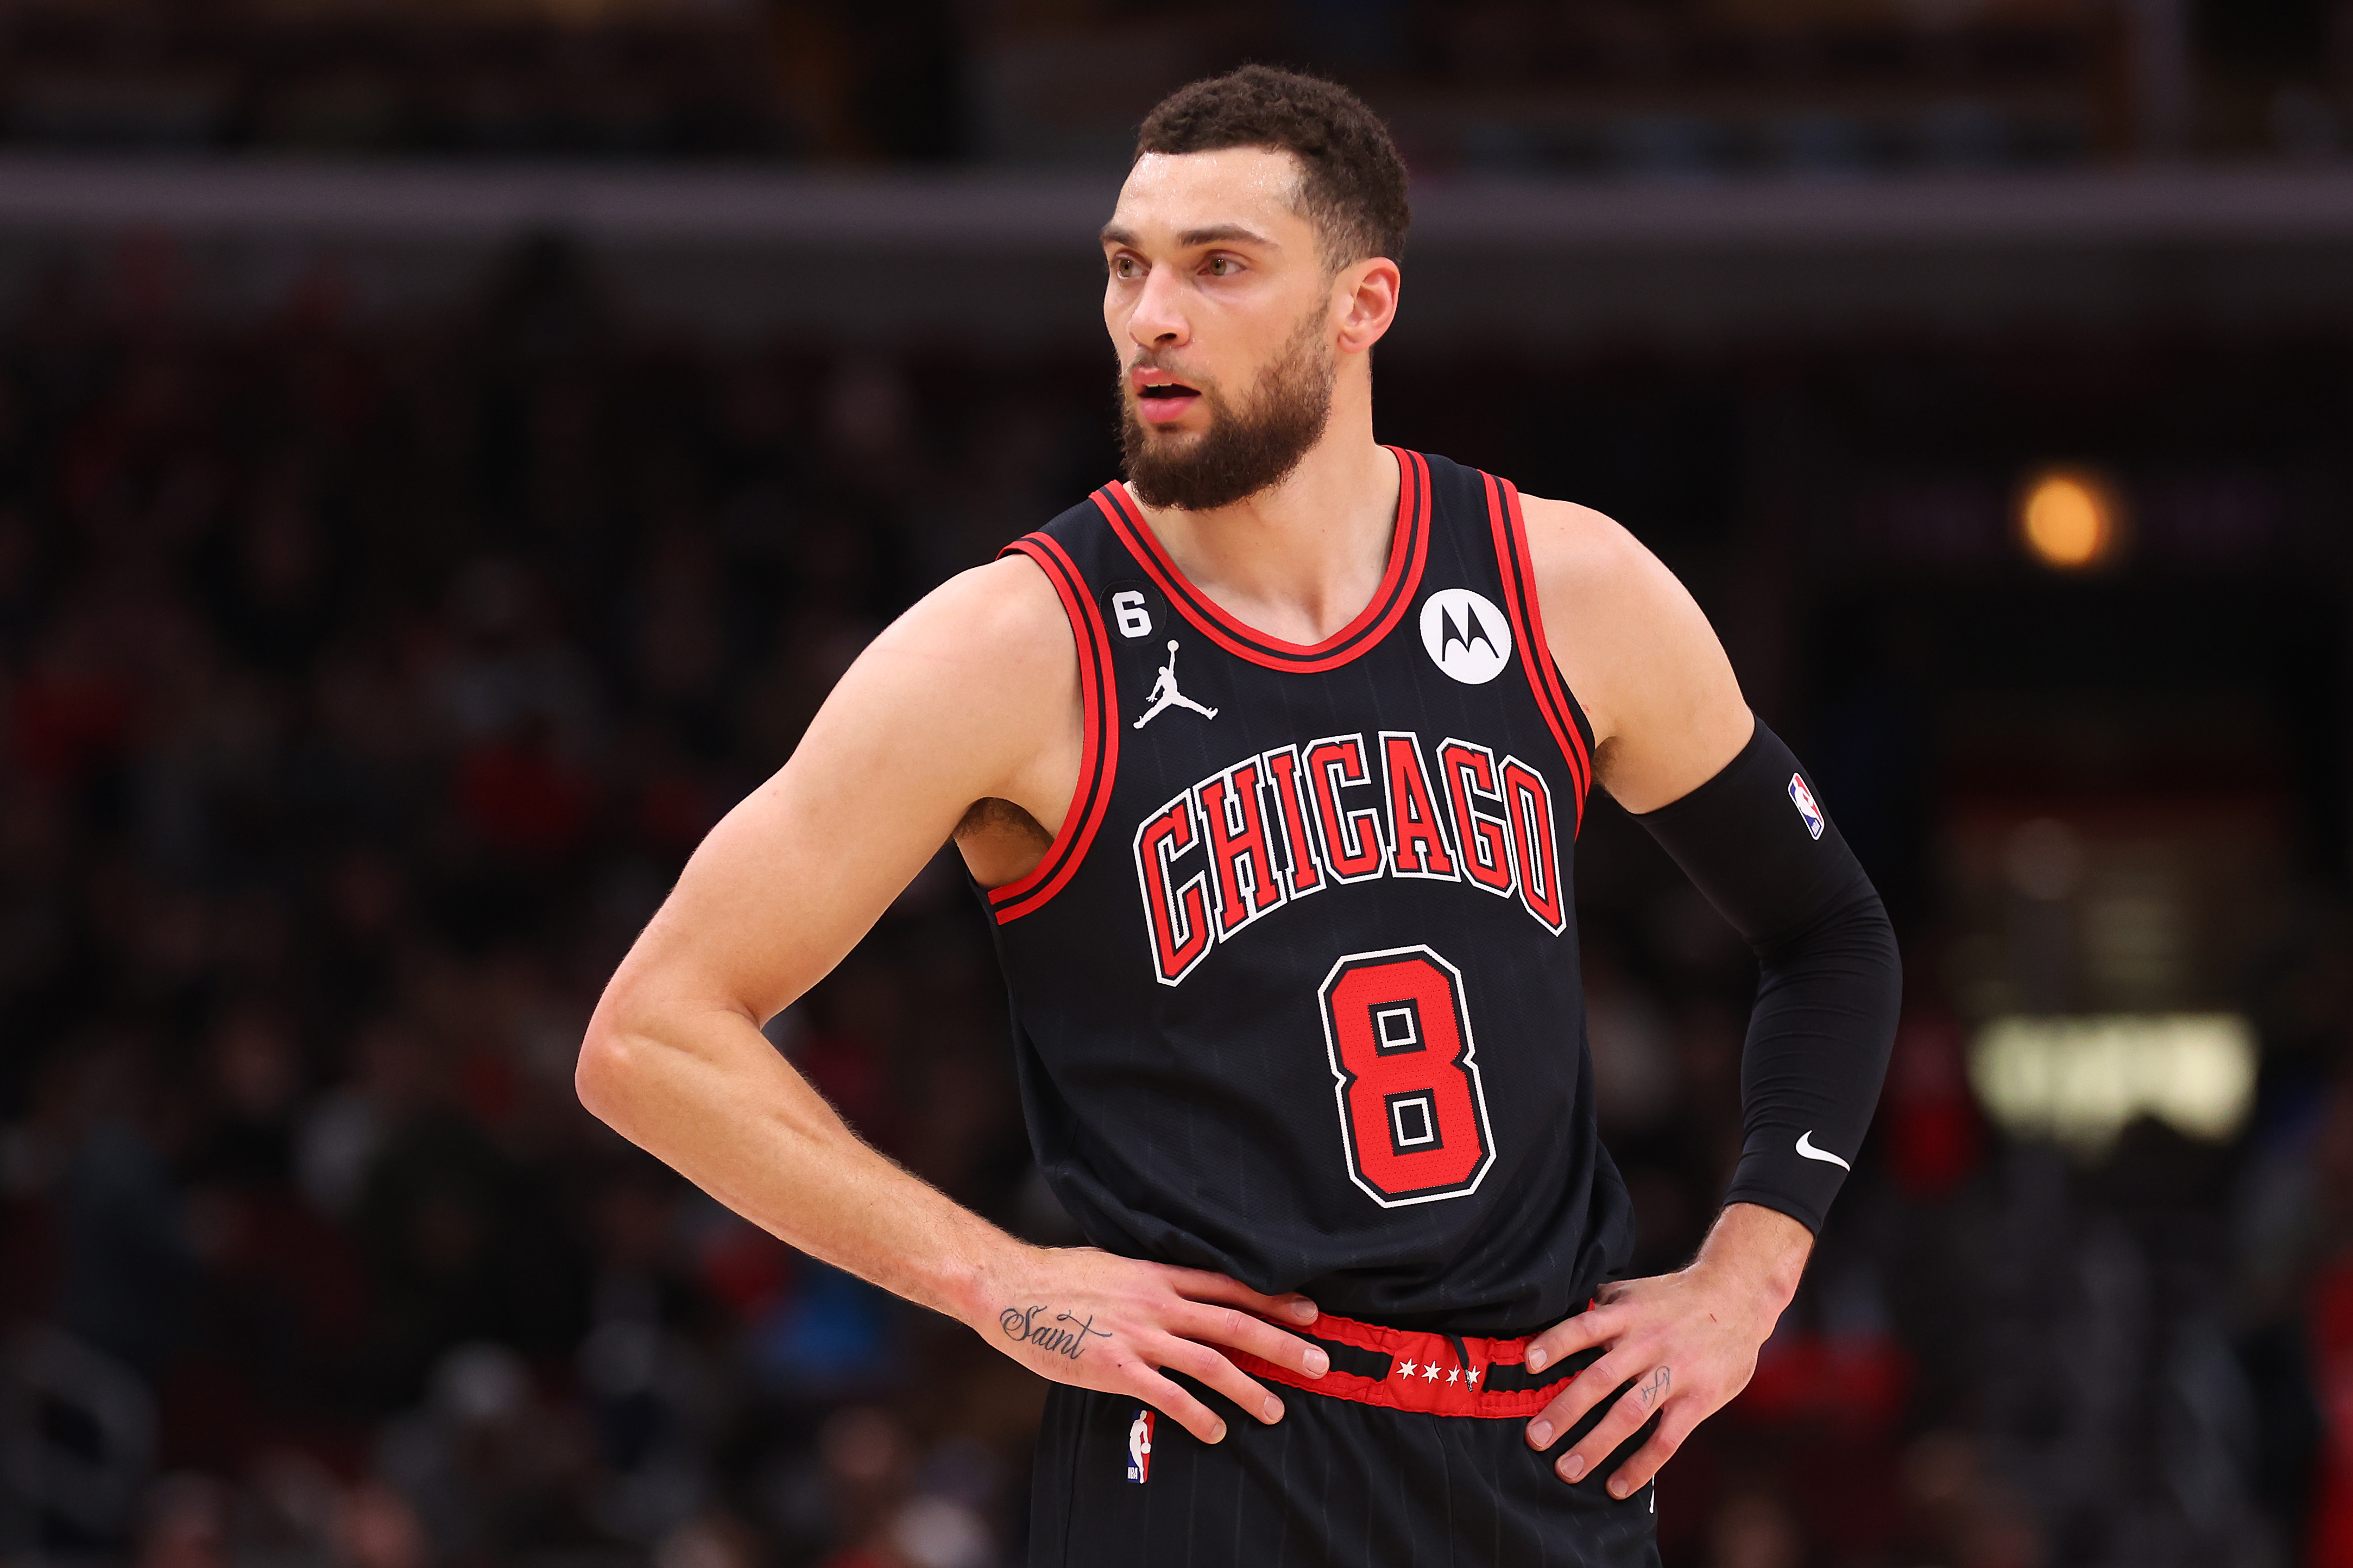 Chicago Bulls Players Aren't Thrilled With 2022-23 City Edition Uniforms -  On Tap Sports Net